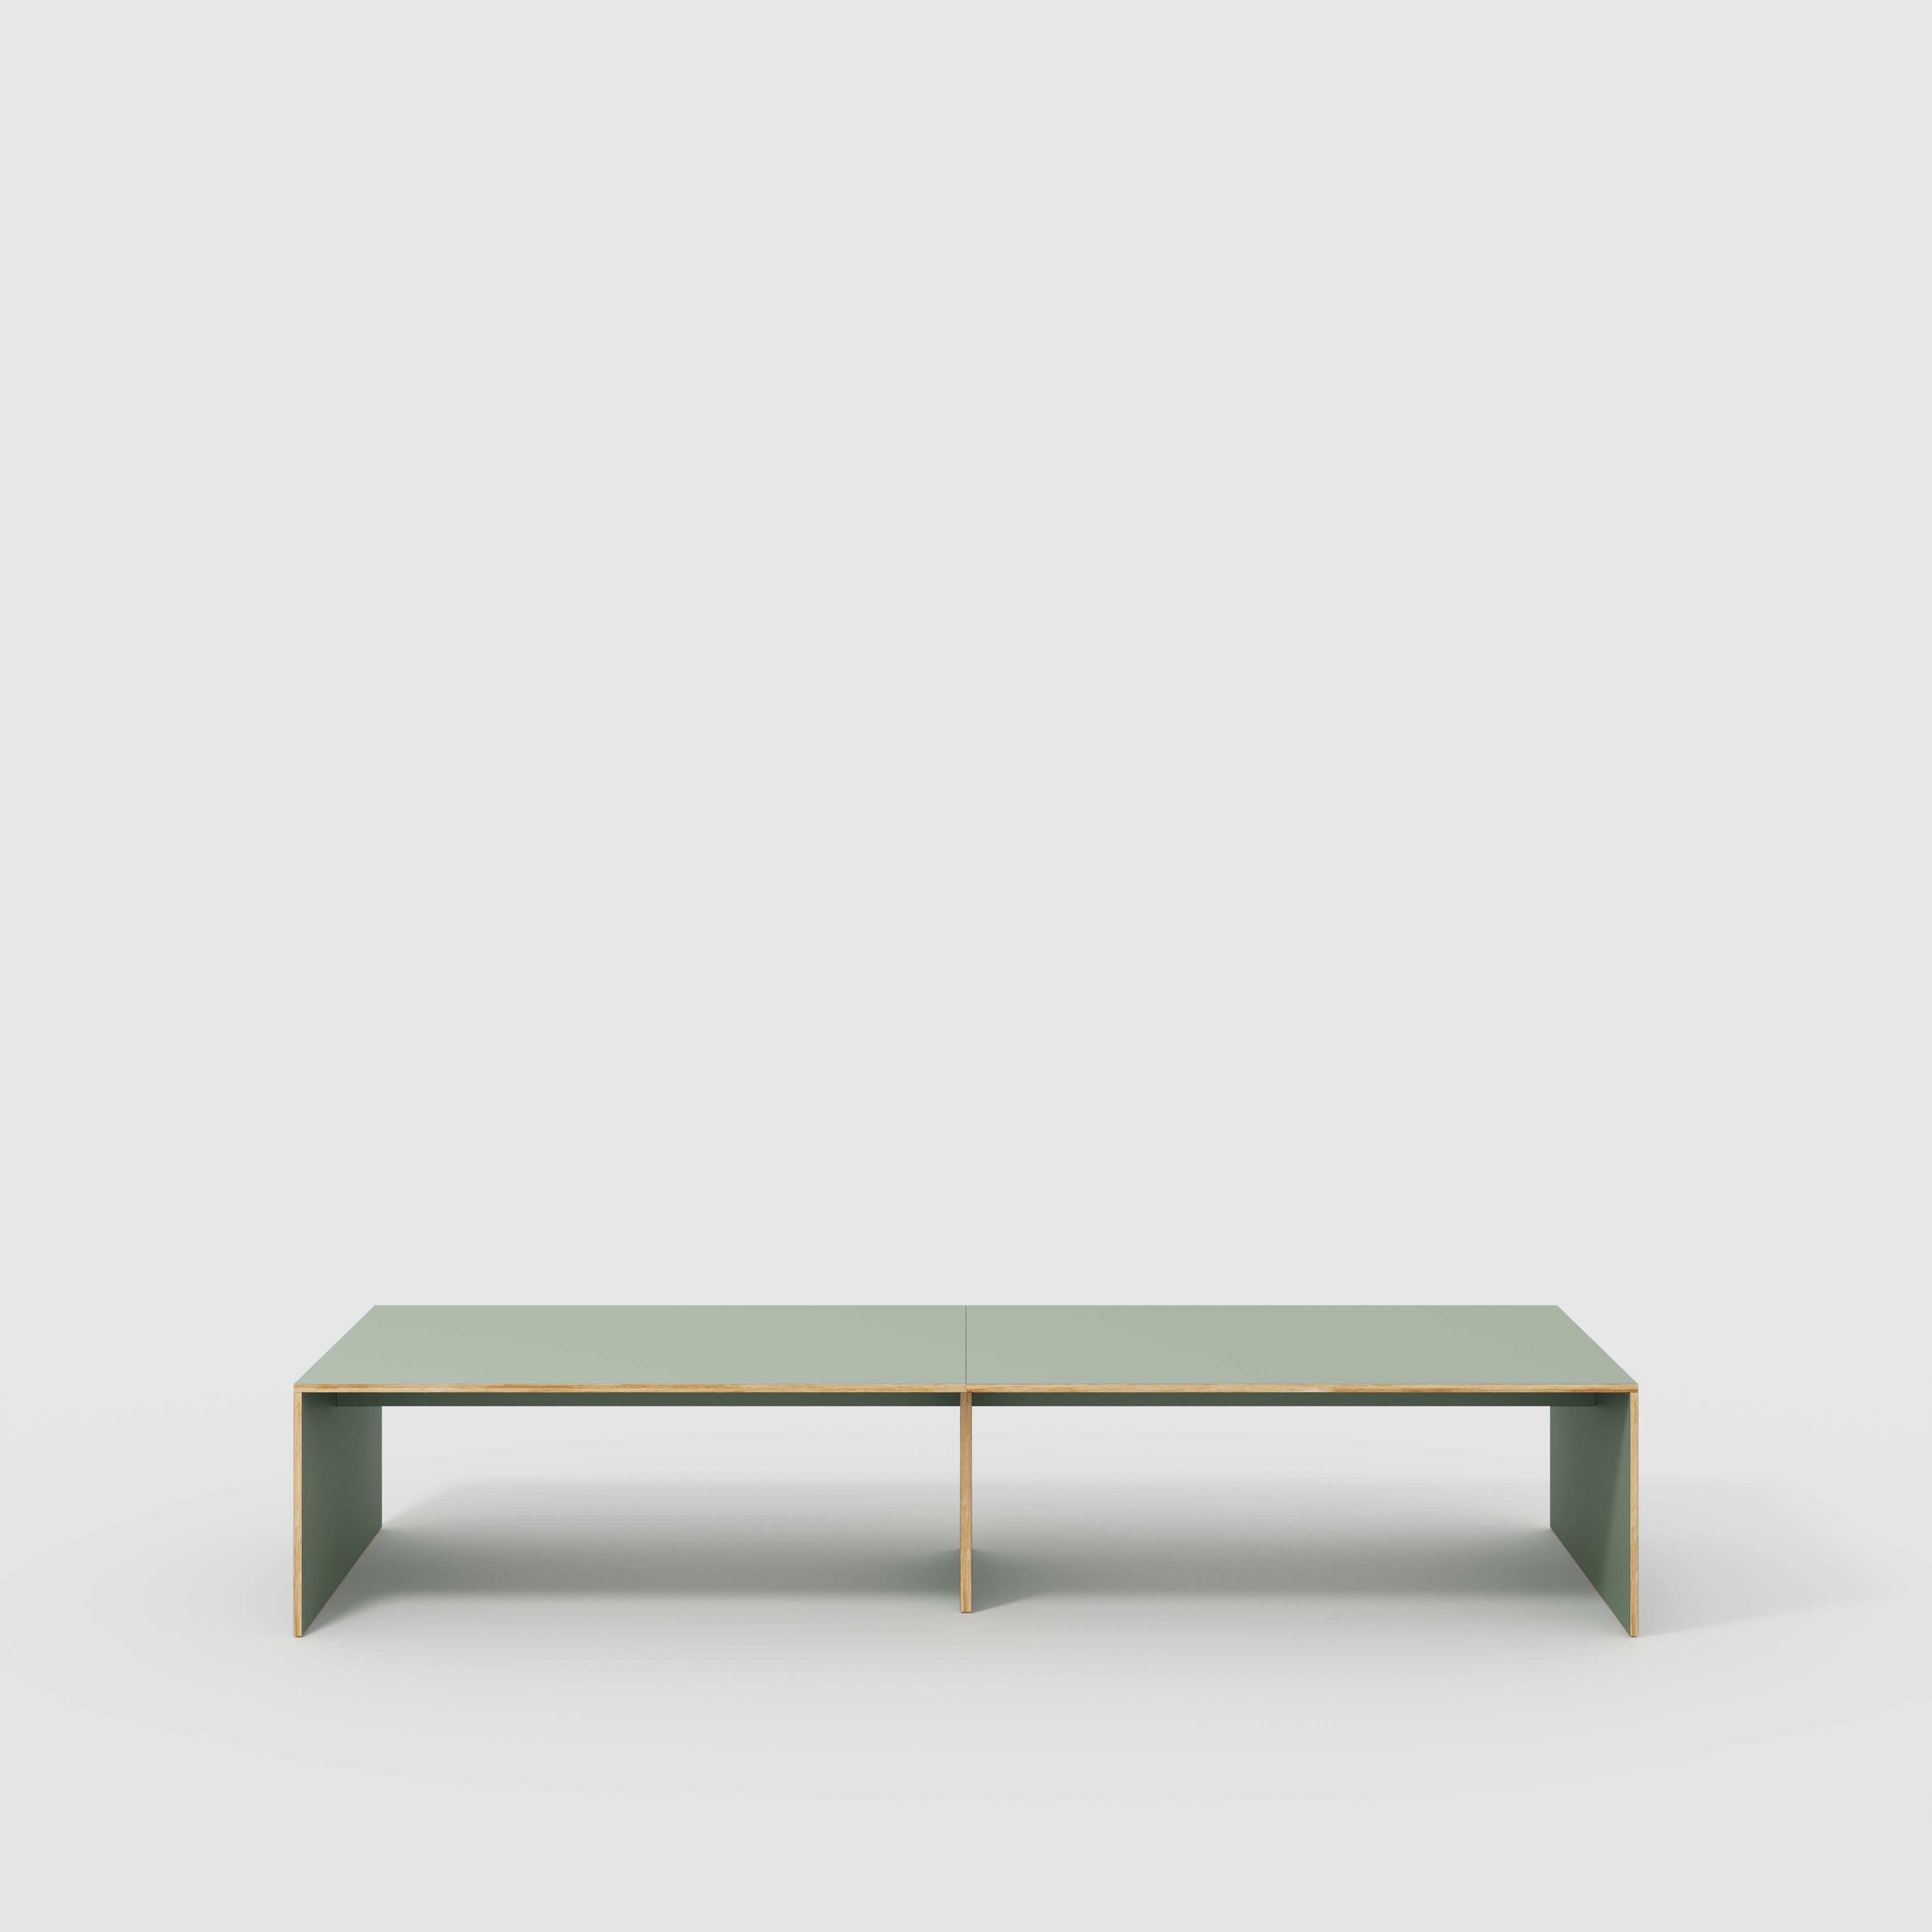 Table with Solid Sides - Formica Green Slate - 4000(w) x 1000(d) x 750(h)